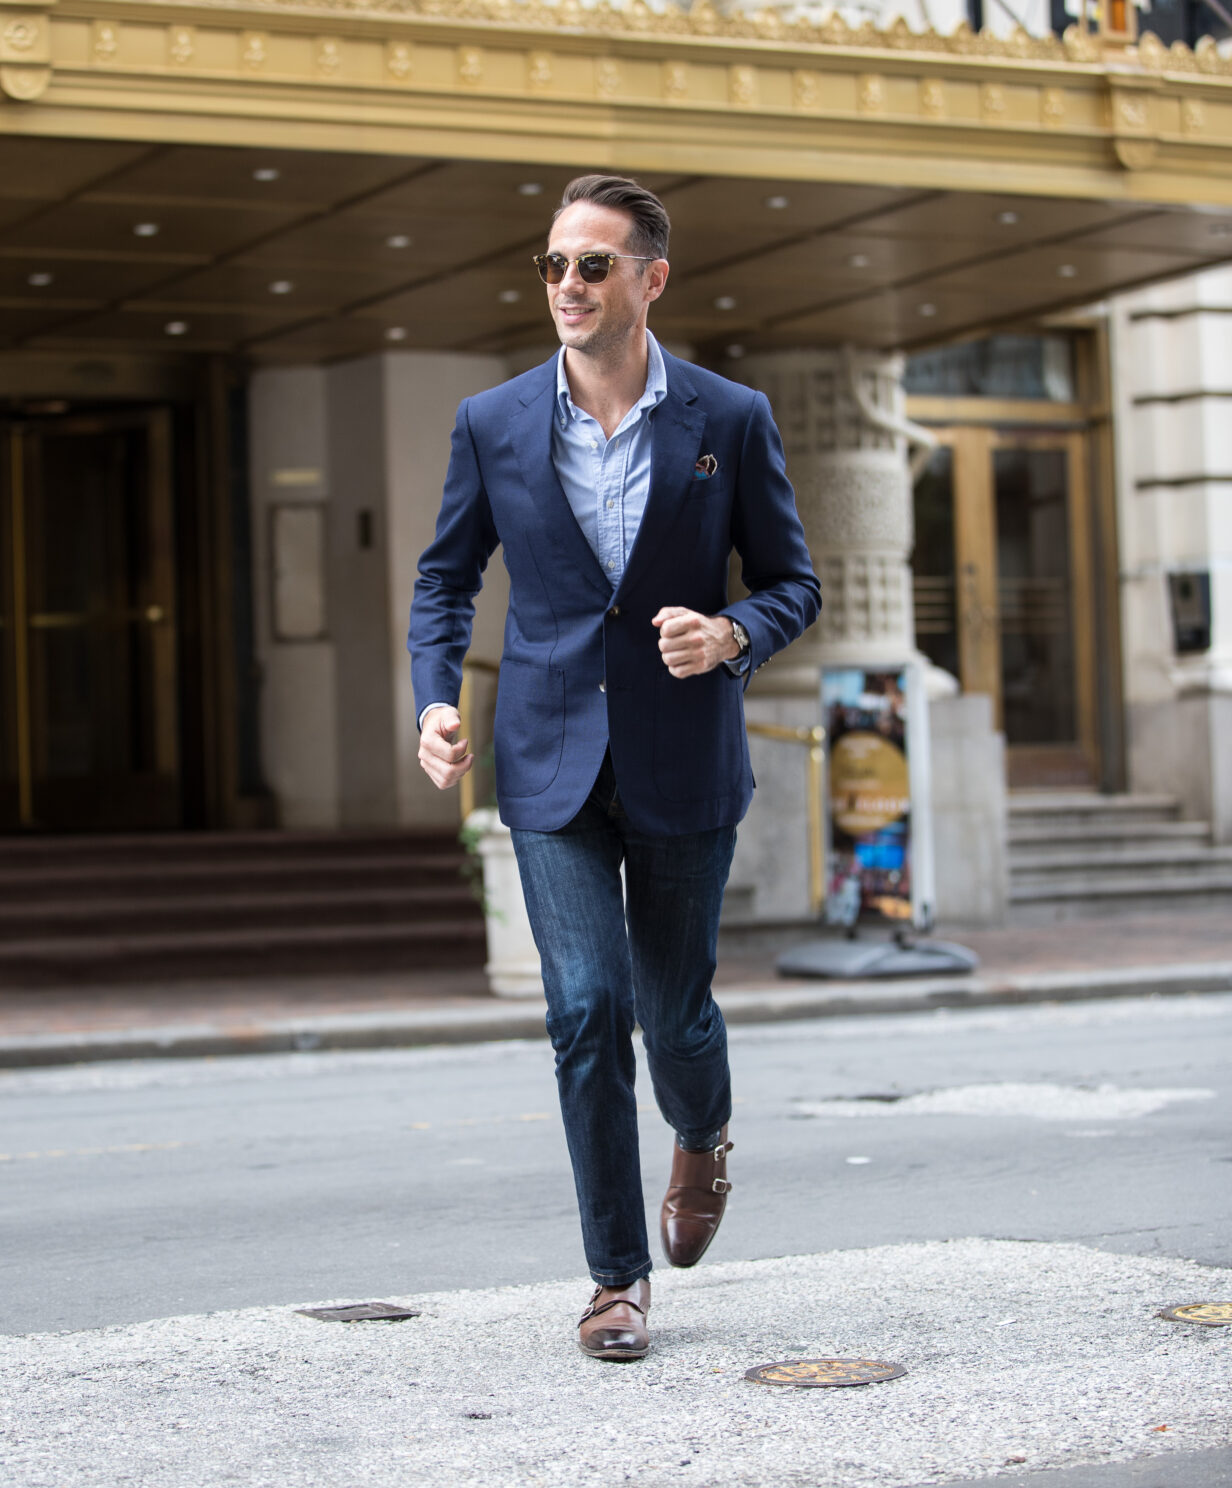 https://hespokestyle.com/wp-content/uploads/2017/09/navy-hopsack-sport-coat-with-jeans-and-ocbd-outfit-idea-616x744@2x.jpg